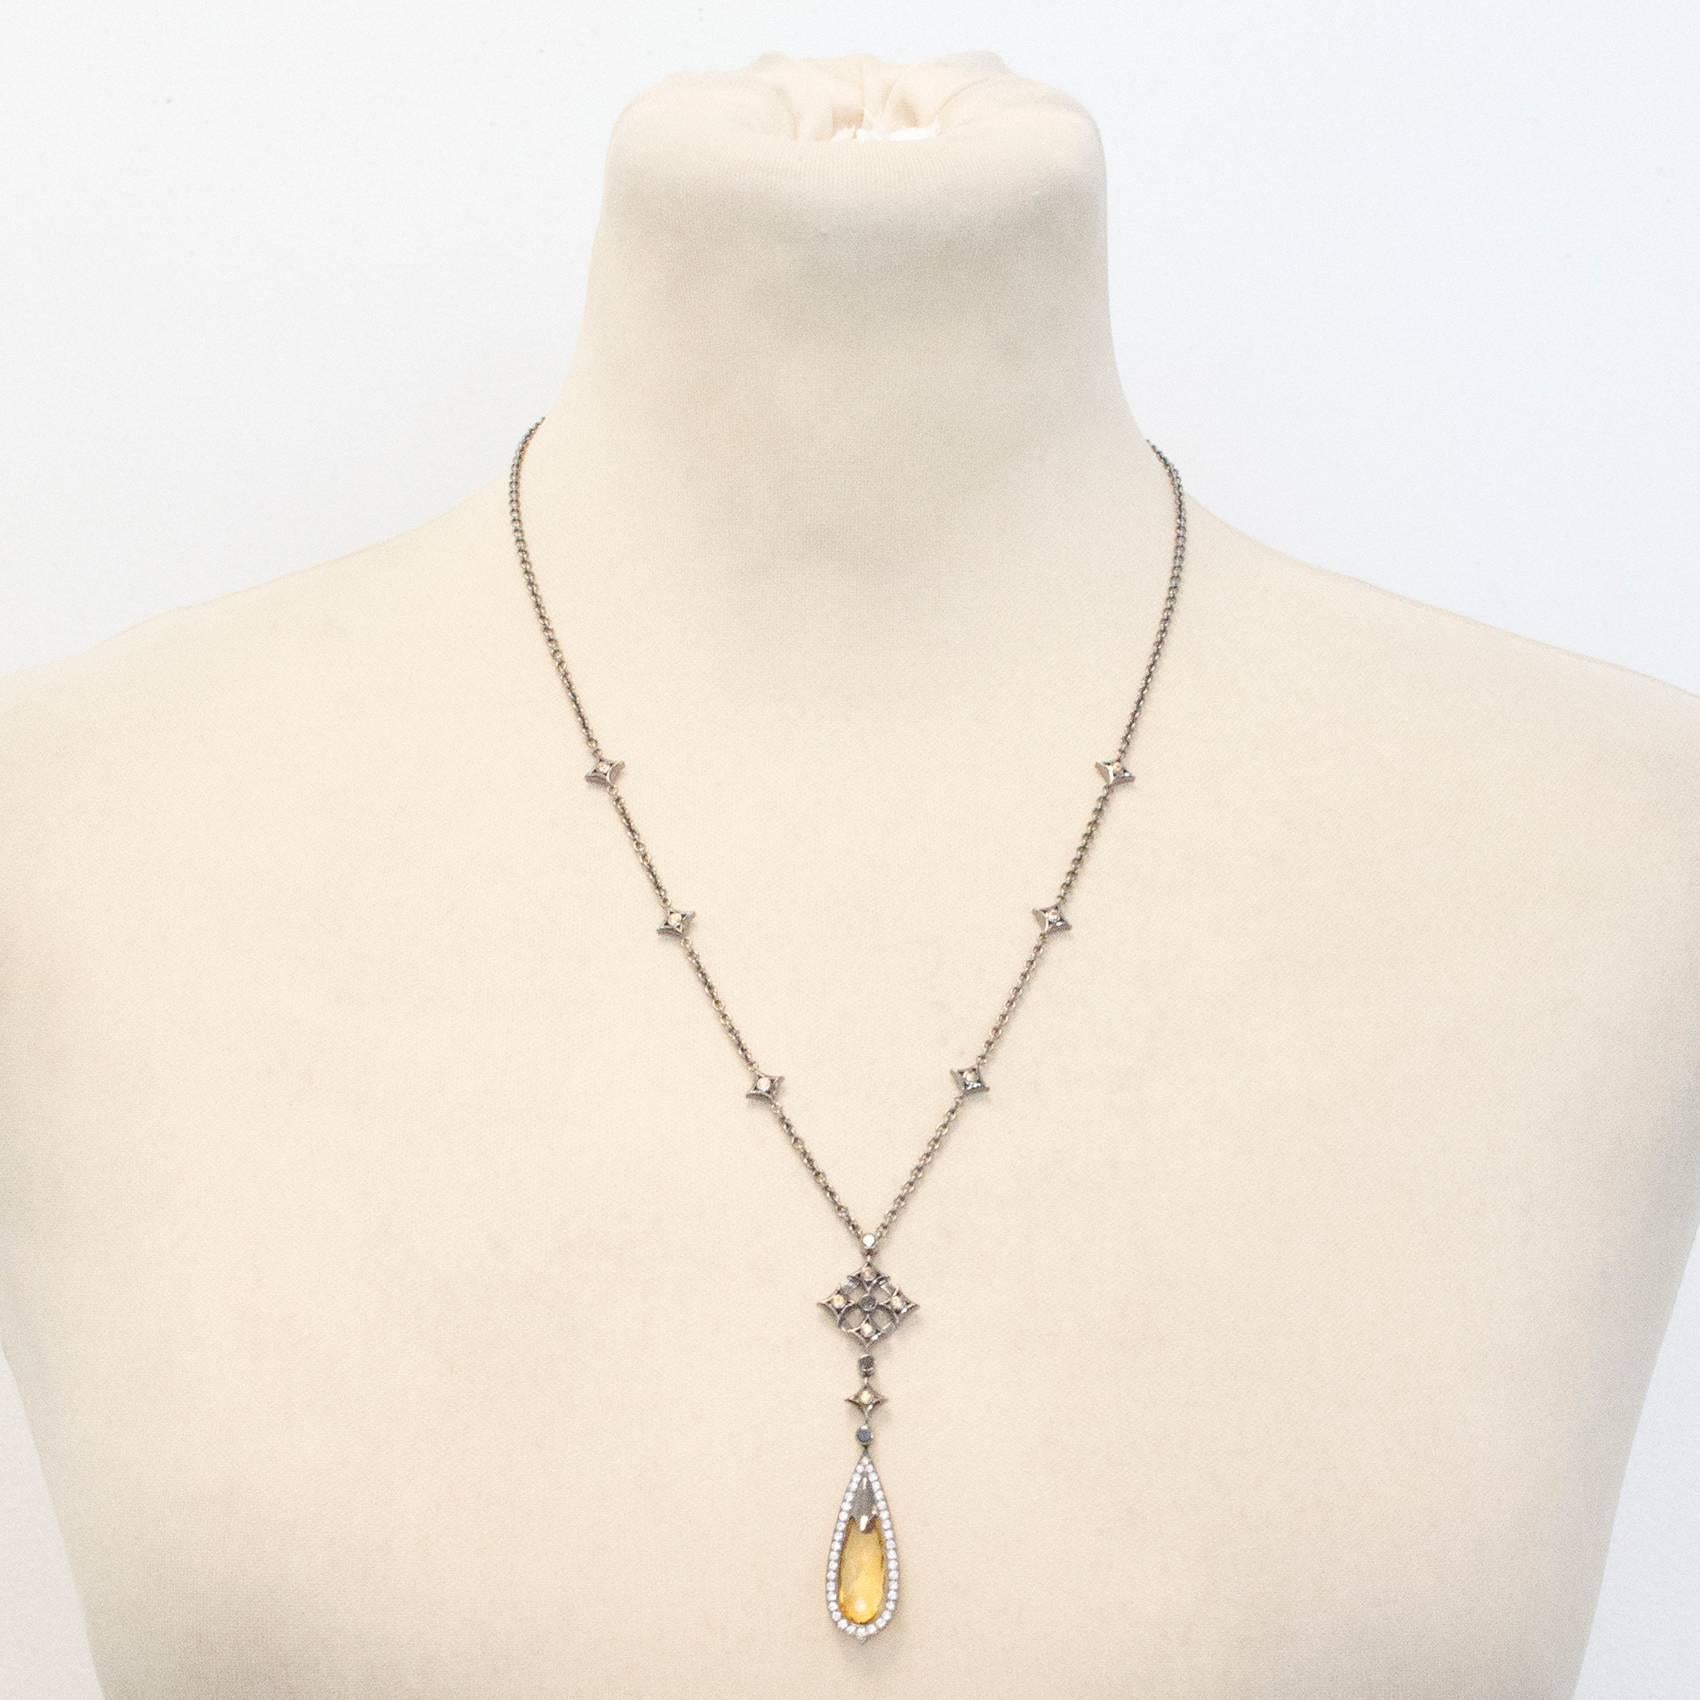 Beautiful Theo Fennell black and silver necklace with citrine/yellow sapphire stone drop pendant.  Citrine/Yellow sapphire surrounded by diamonds. Cross motif at top of drop pendant with small yellow sapphires on chain of necklace.

This necklace is